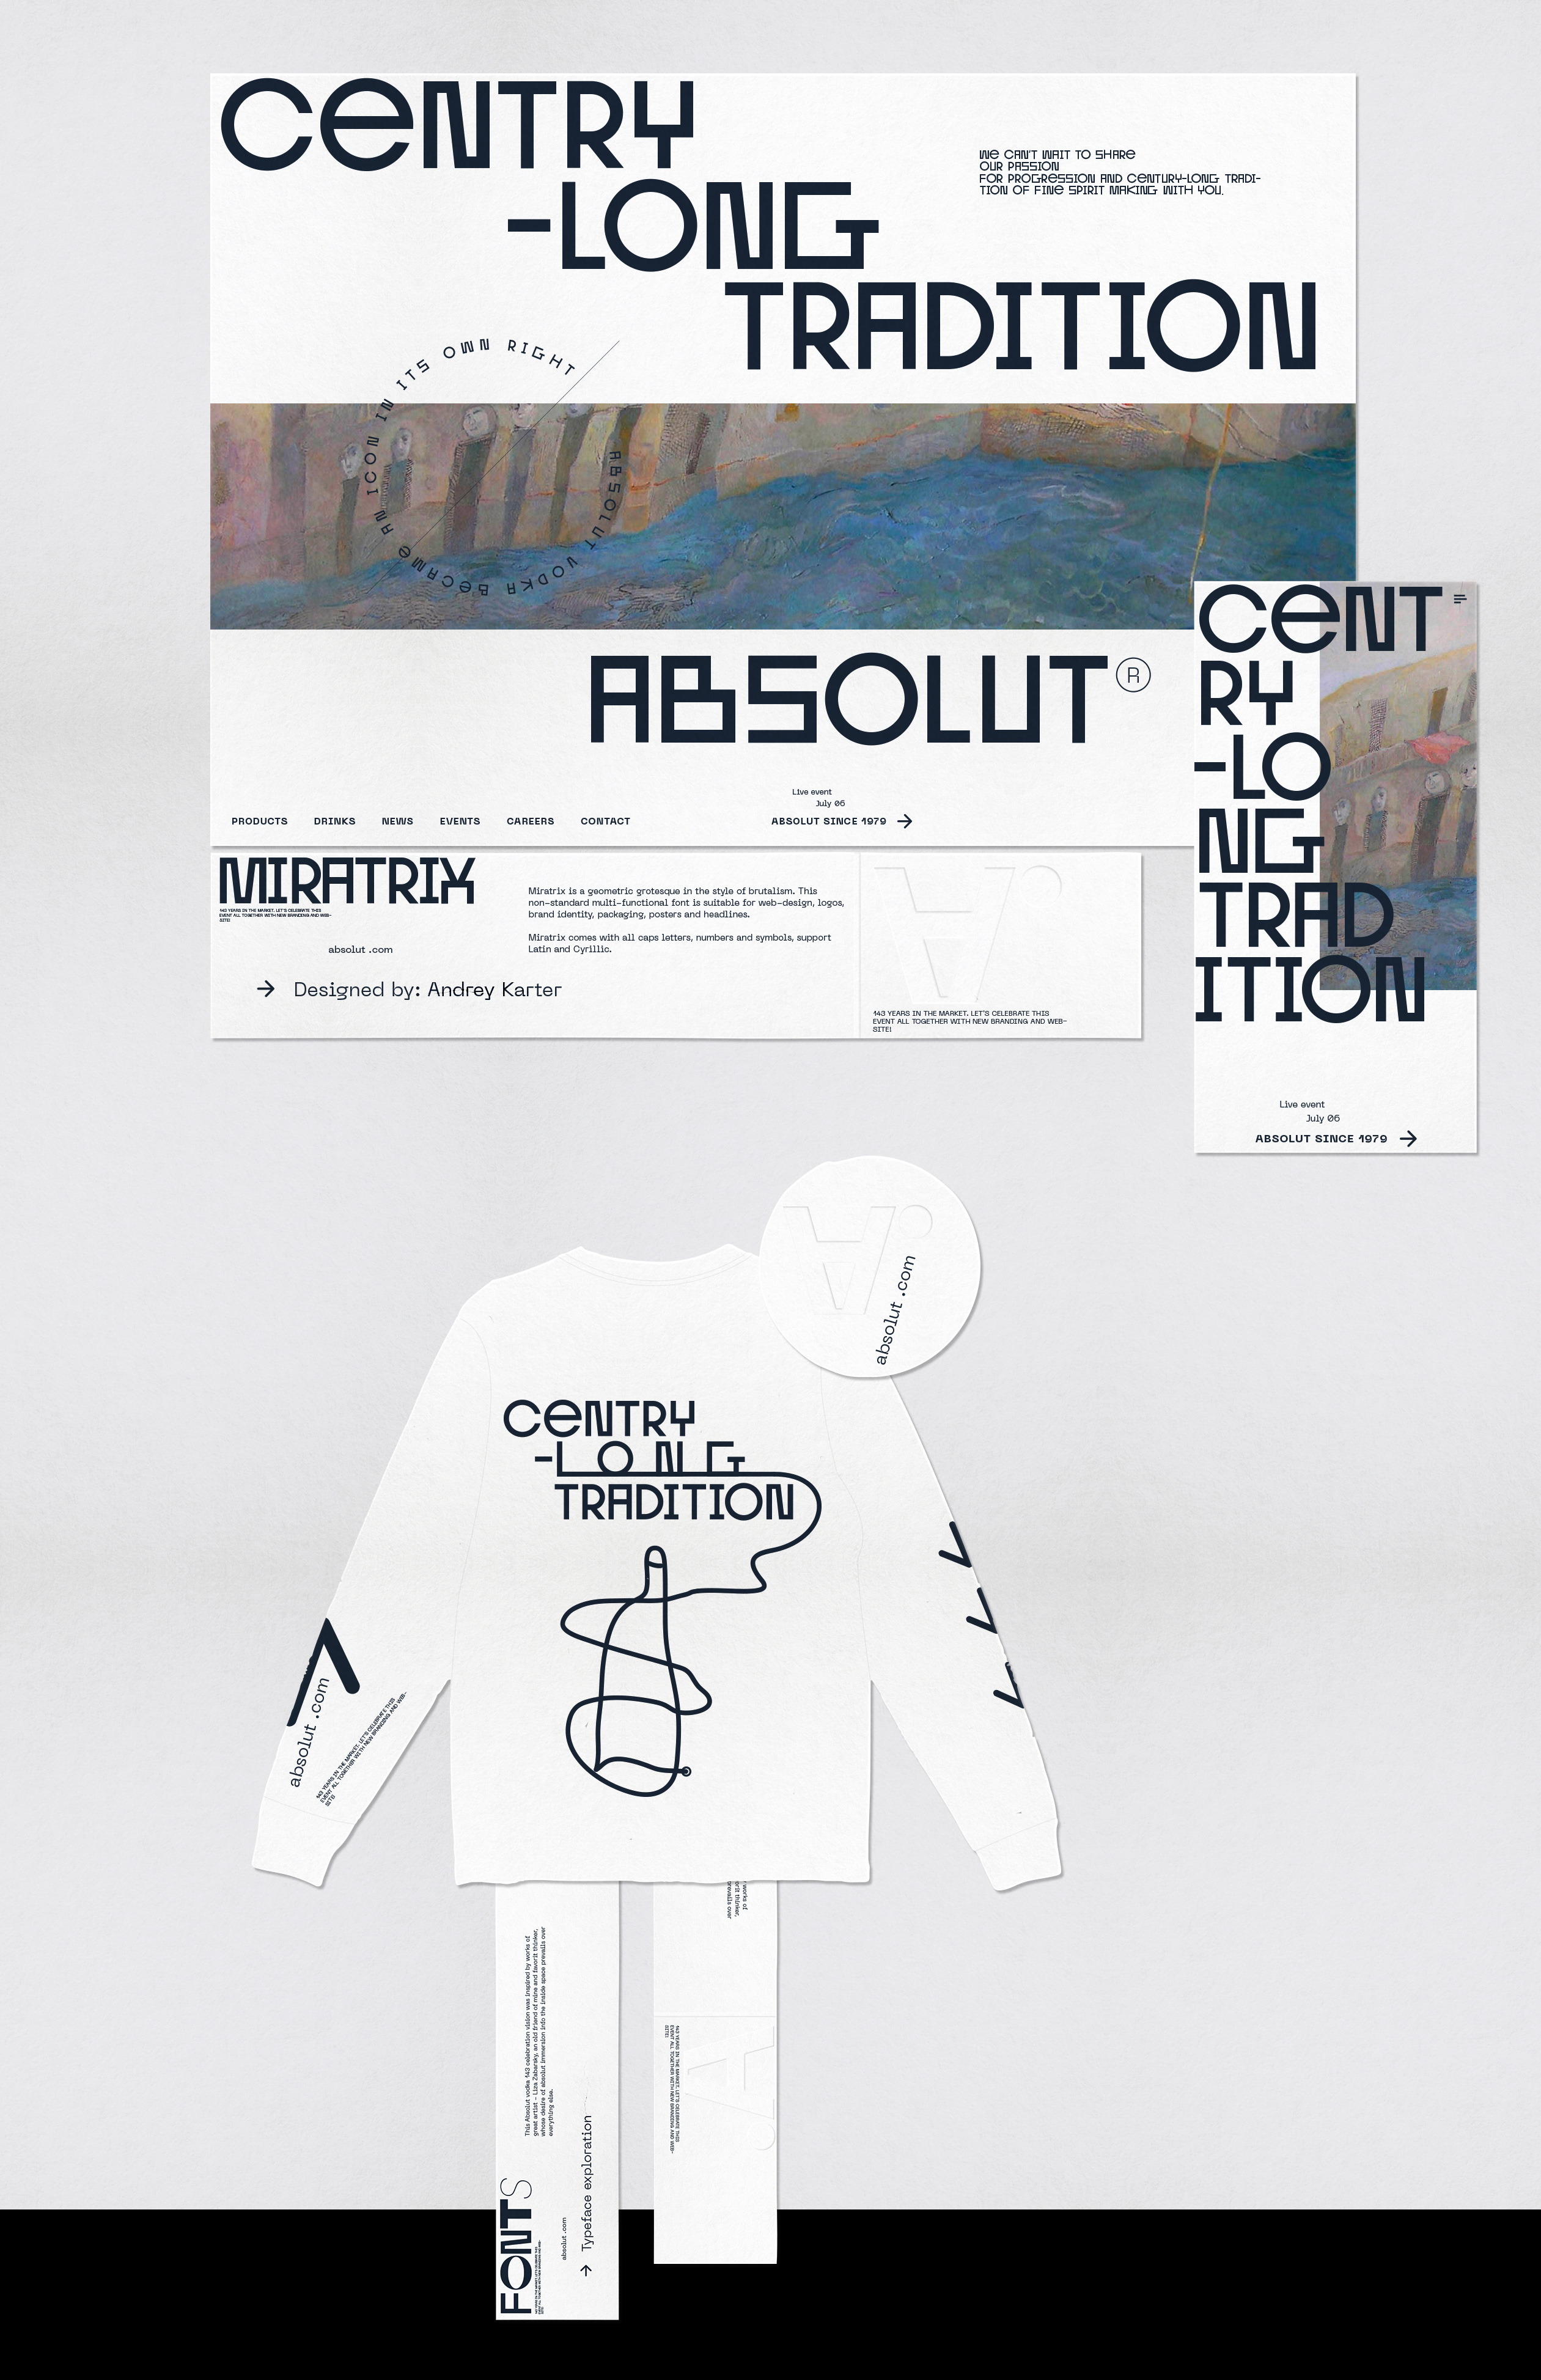 This publication is showing the working process on choosing the right font for the Absolut thru Zabarsky project. I have chosen five typefaces and designed this page to showcase how significant a font can affect the composition